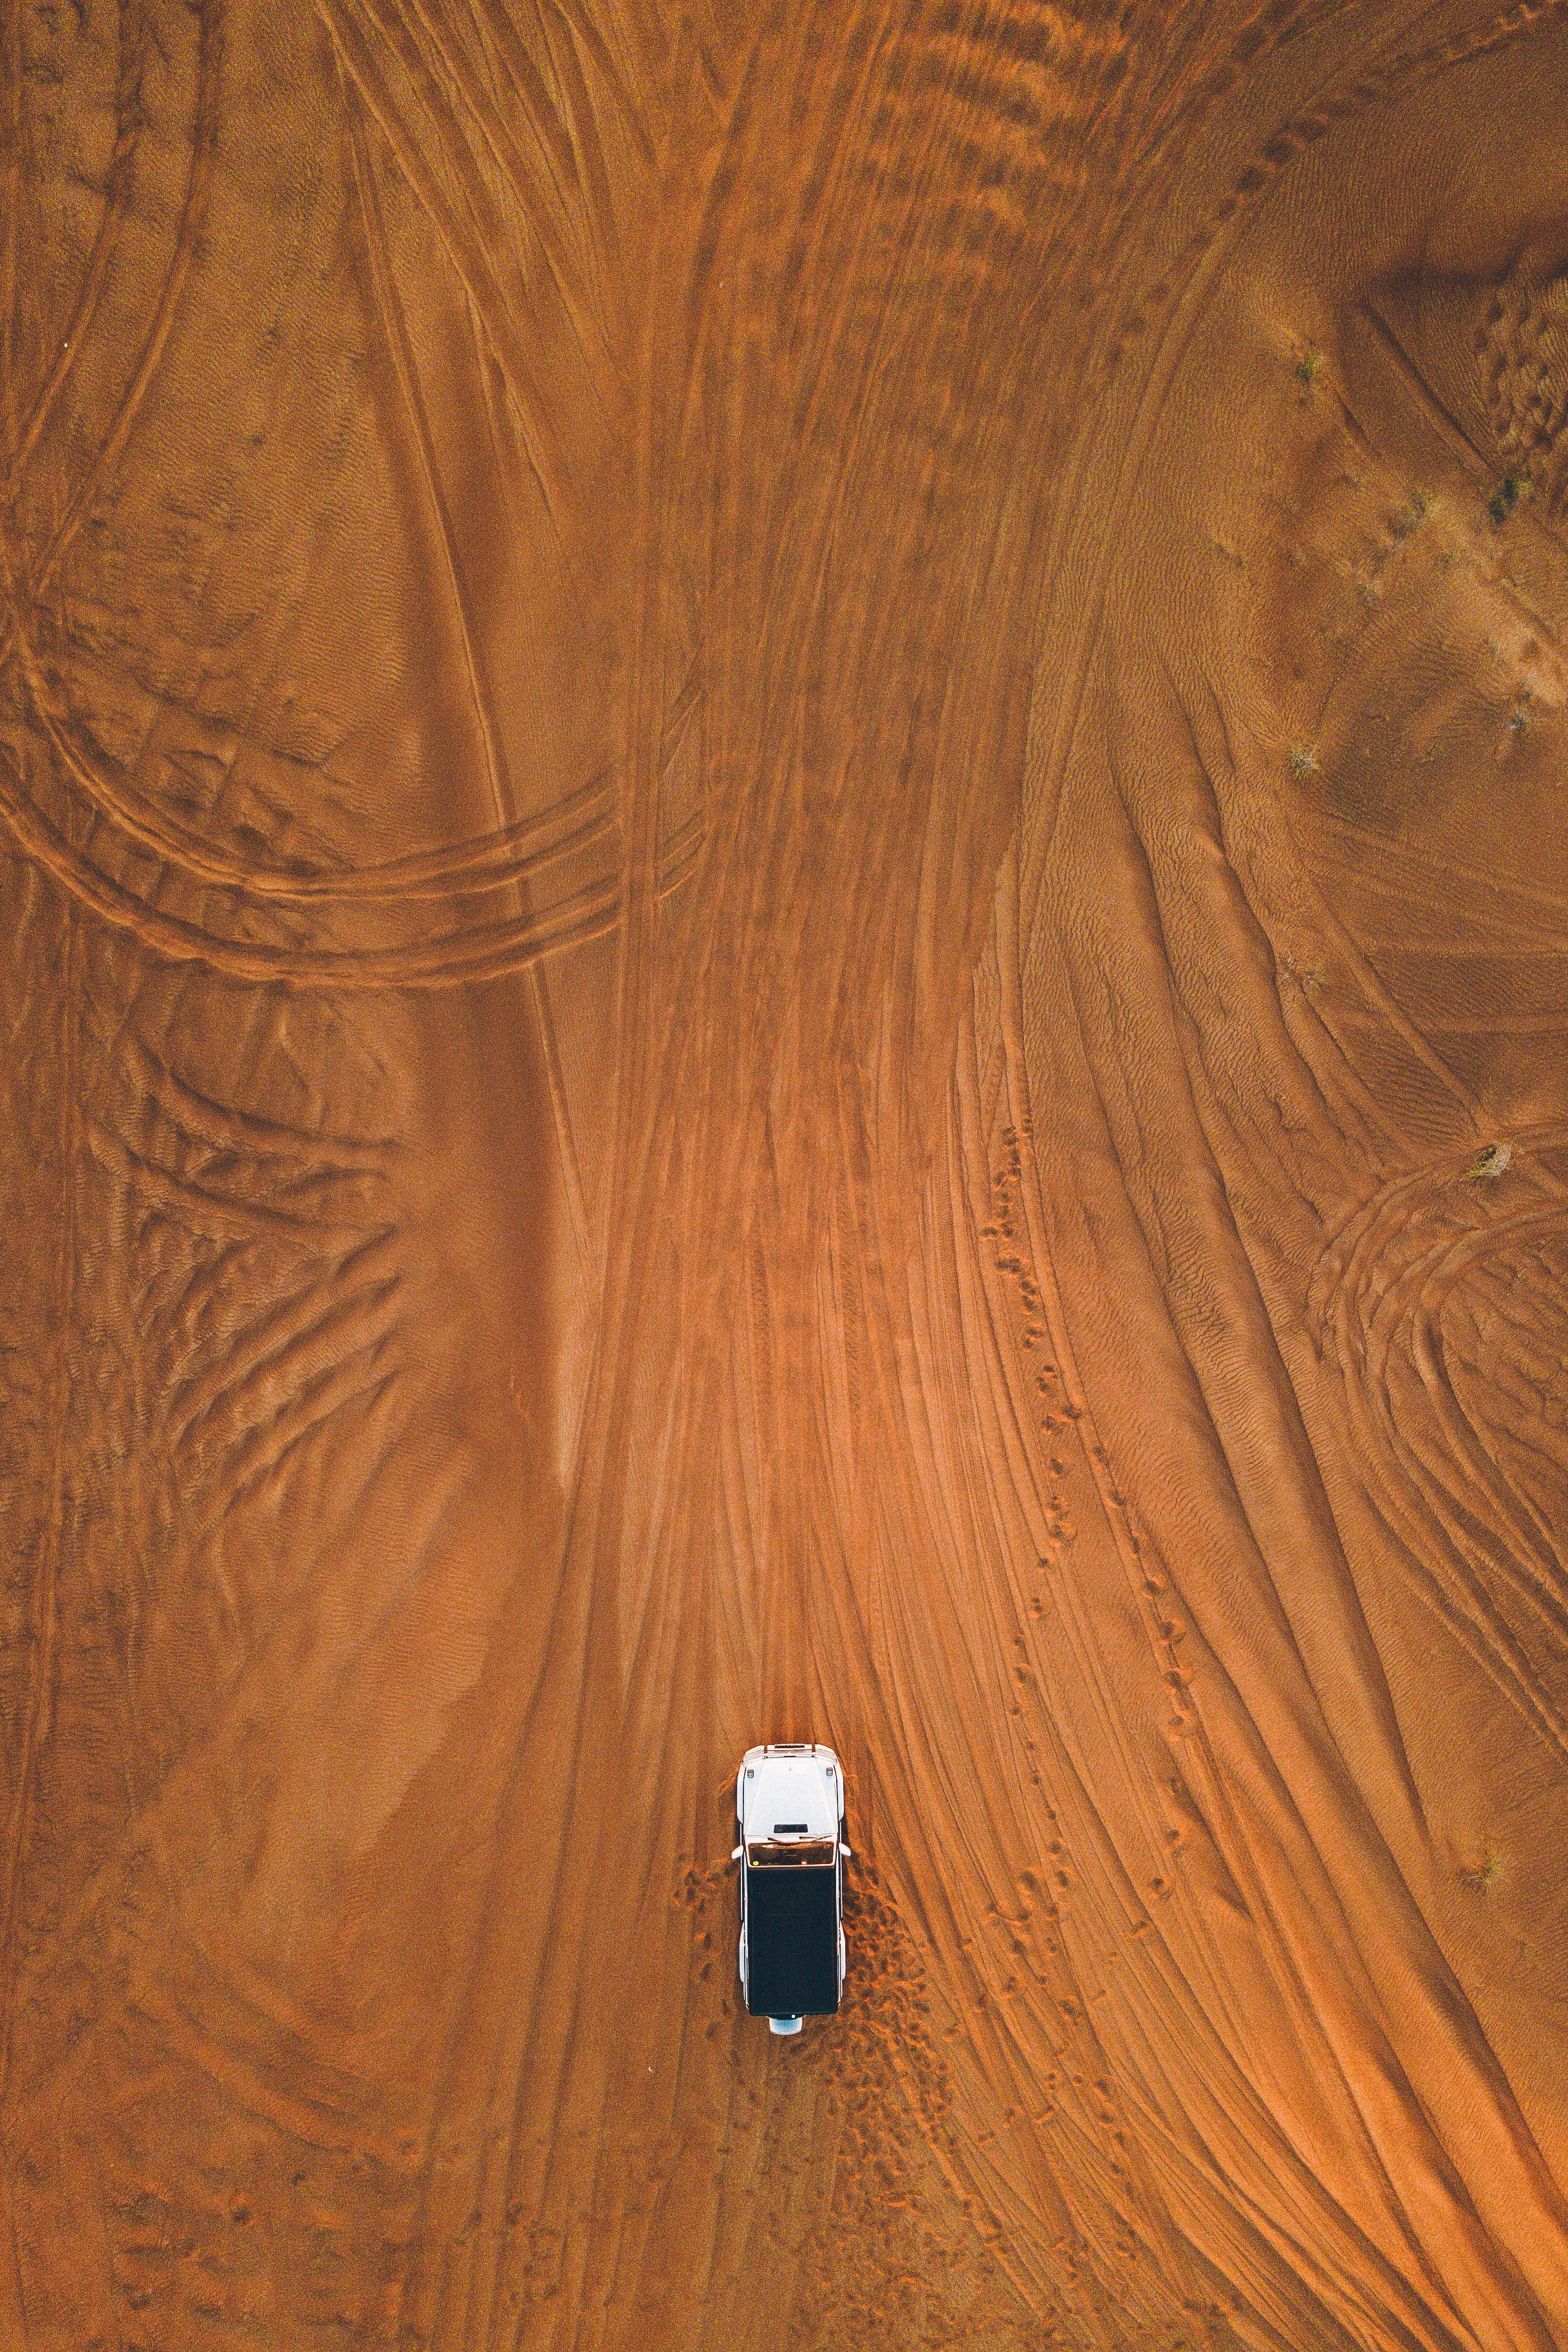 minimalism, sand, desert, view from above, car, machine, traces, off road, impassability